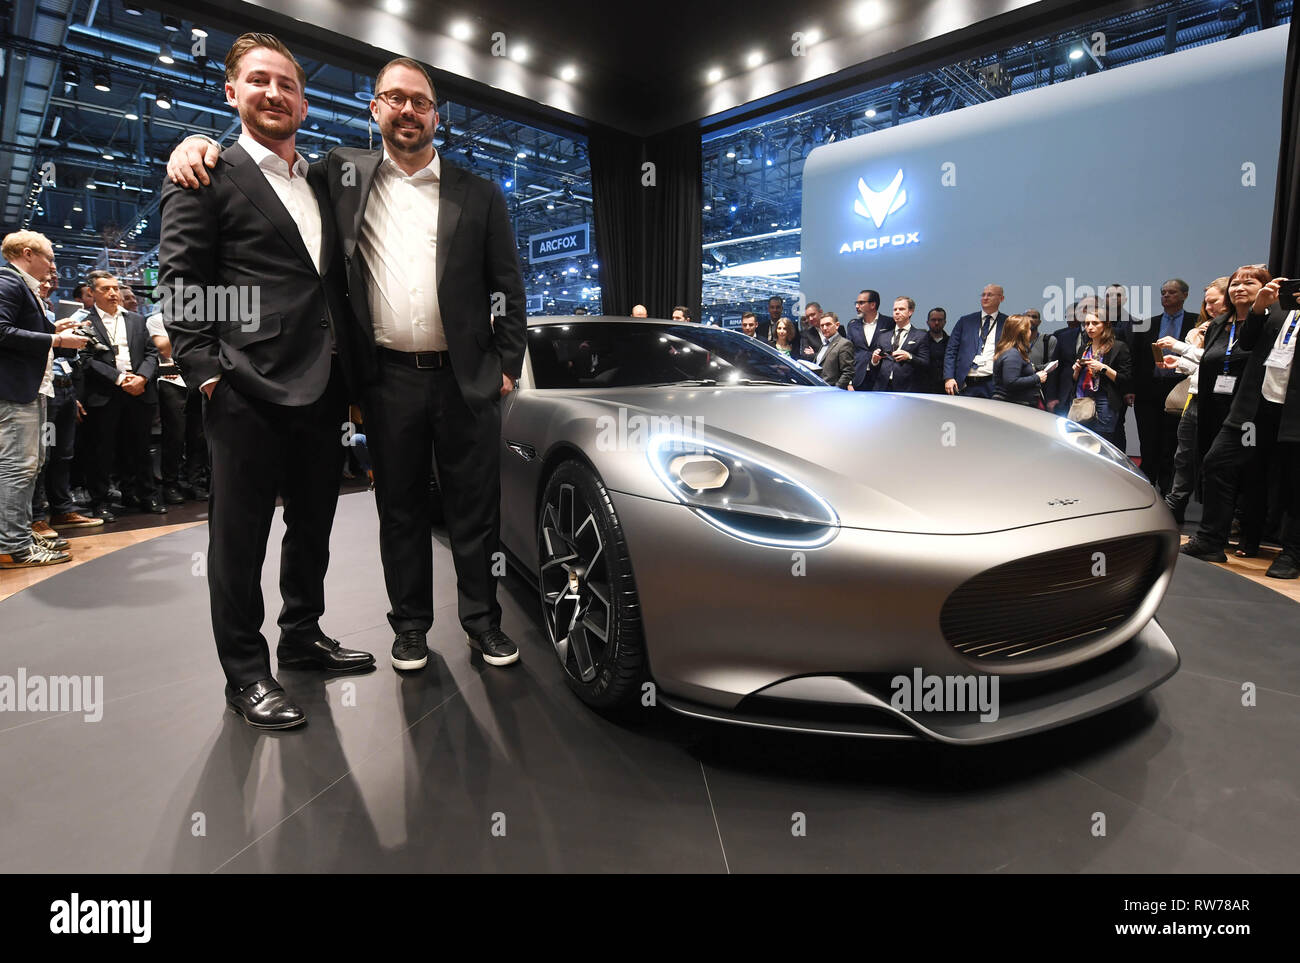 Genf, Switzerland. 05th Mar, 2019. Anton Piech (r), a son of former VW boss Ferdinand Piech, and Rea Stark Rajcic, both managing directors of Piech Automotive, present the electrically powered Piech Mark Zero sports car at the Geneva Motor Show on the first press day. The 89th Geneva Motor Show starts on 7 March and lasts until 17 March. Credit: Uli Deck/dpa/Alamy Live News Stock Photo